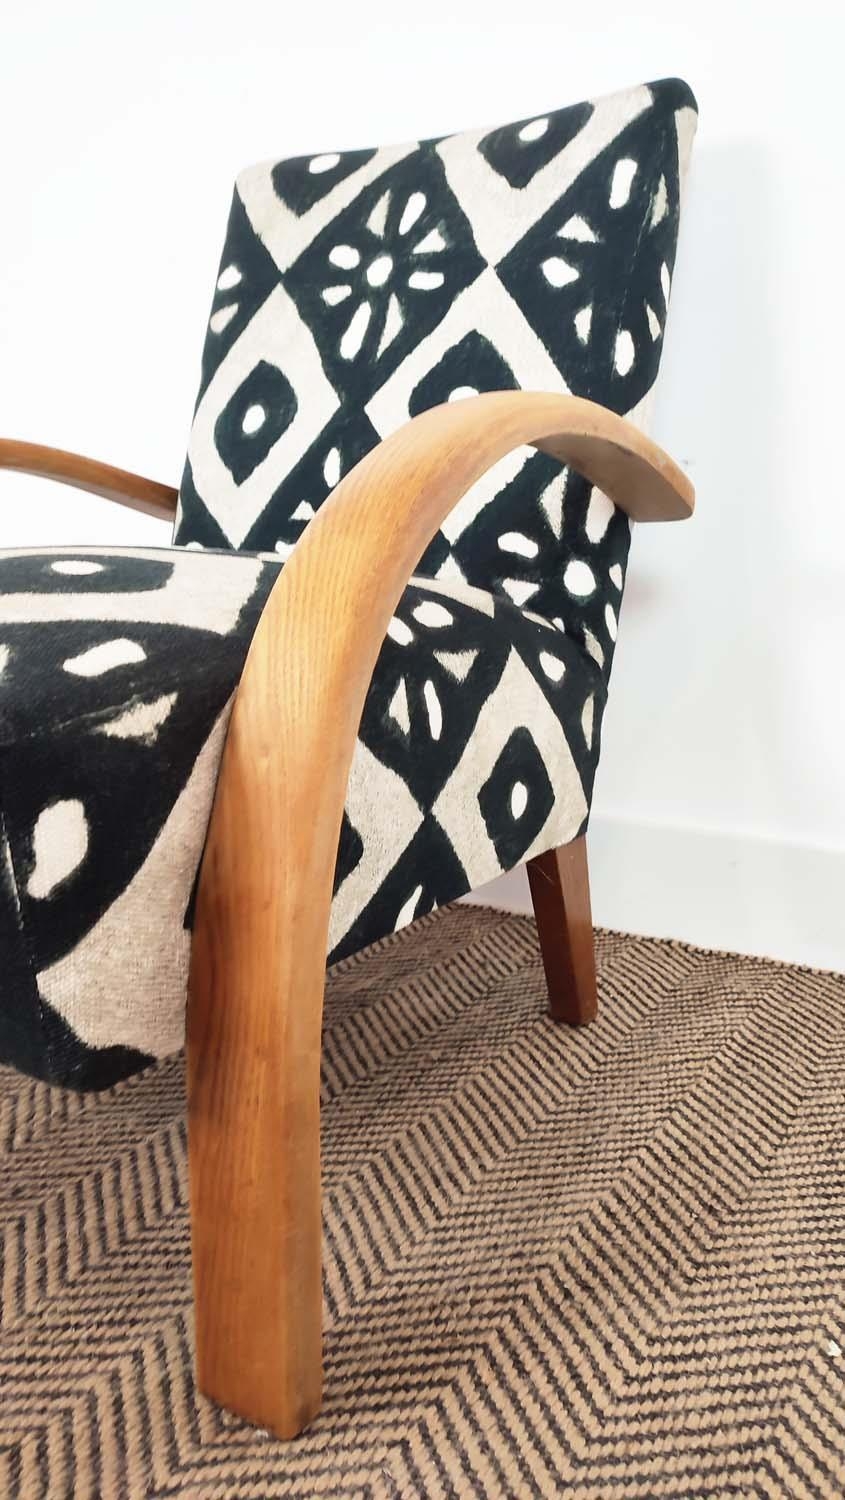 HALBALA ARMCHAIR, mid 20th century bentwood in black and white geometric material, 77cm H x 60cm W x - Image 10 of 10